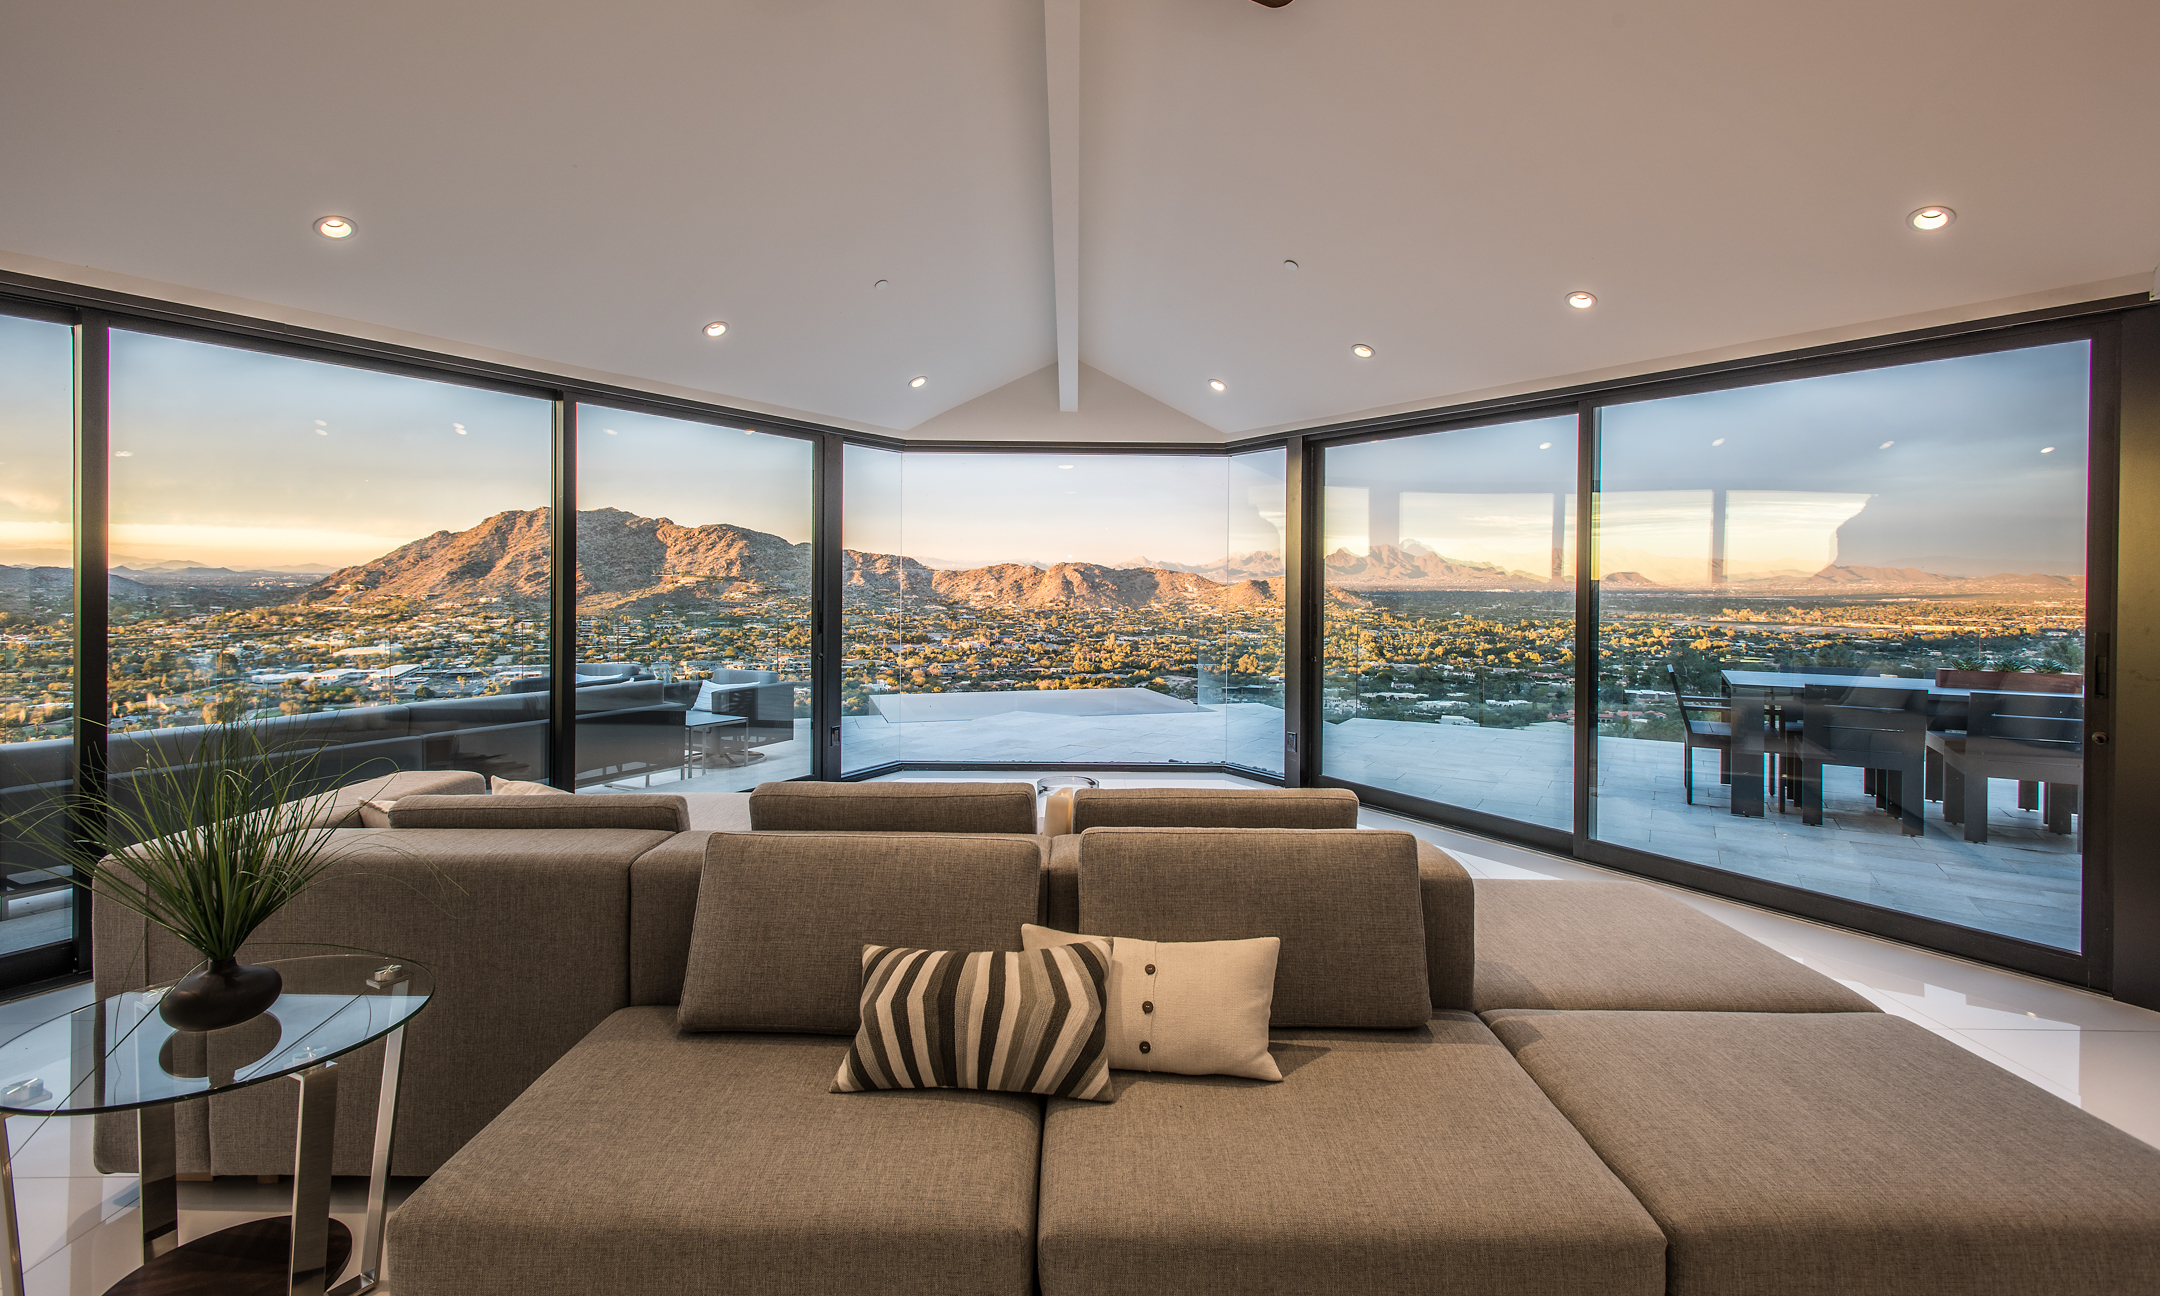 View from living room couch showing floor-to-ceiling windows, showcasing wrap-around patio and spectacular valley views.